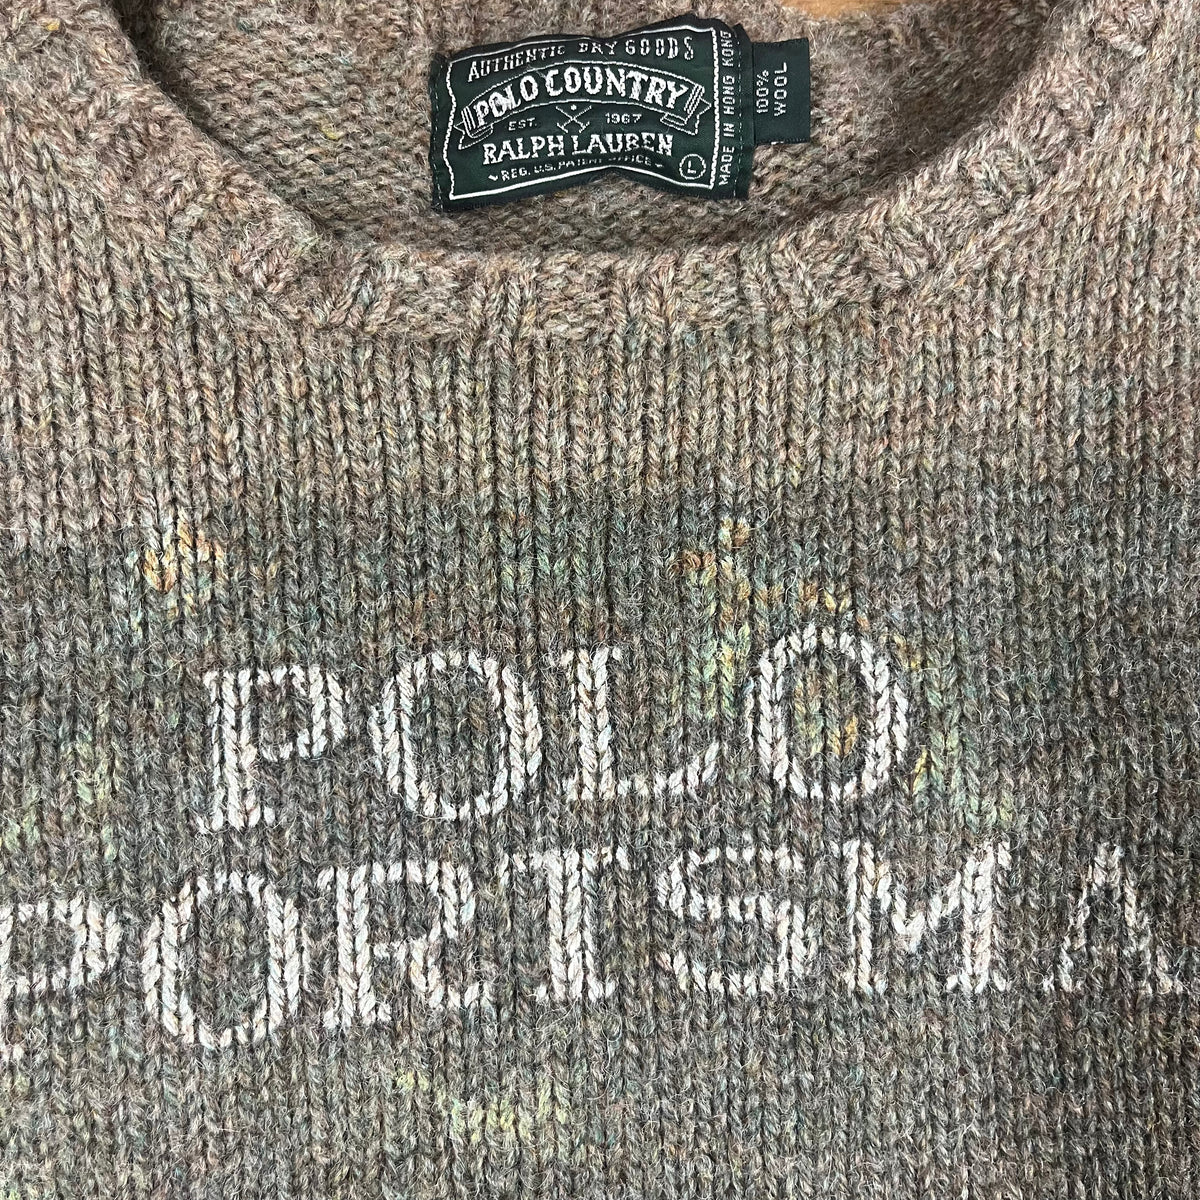 Vintage Polo Ralph Lauren Country &quot;Polo Sportsman&quot; Wool Knit Sweater